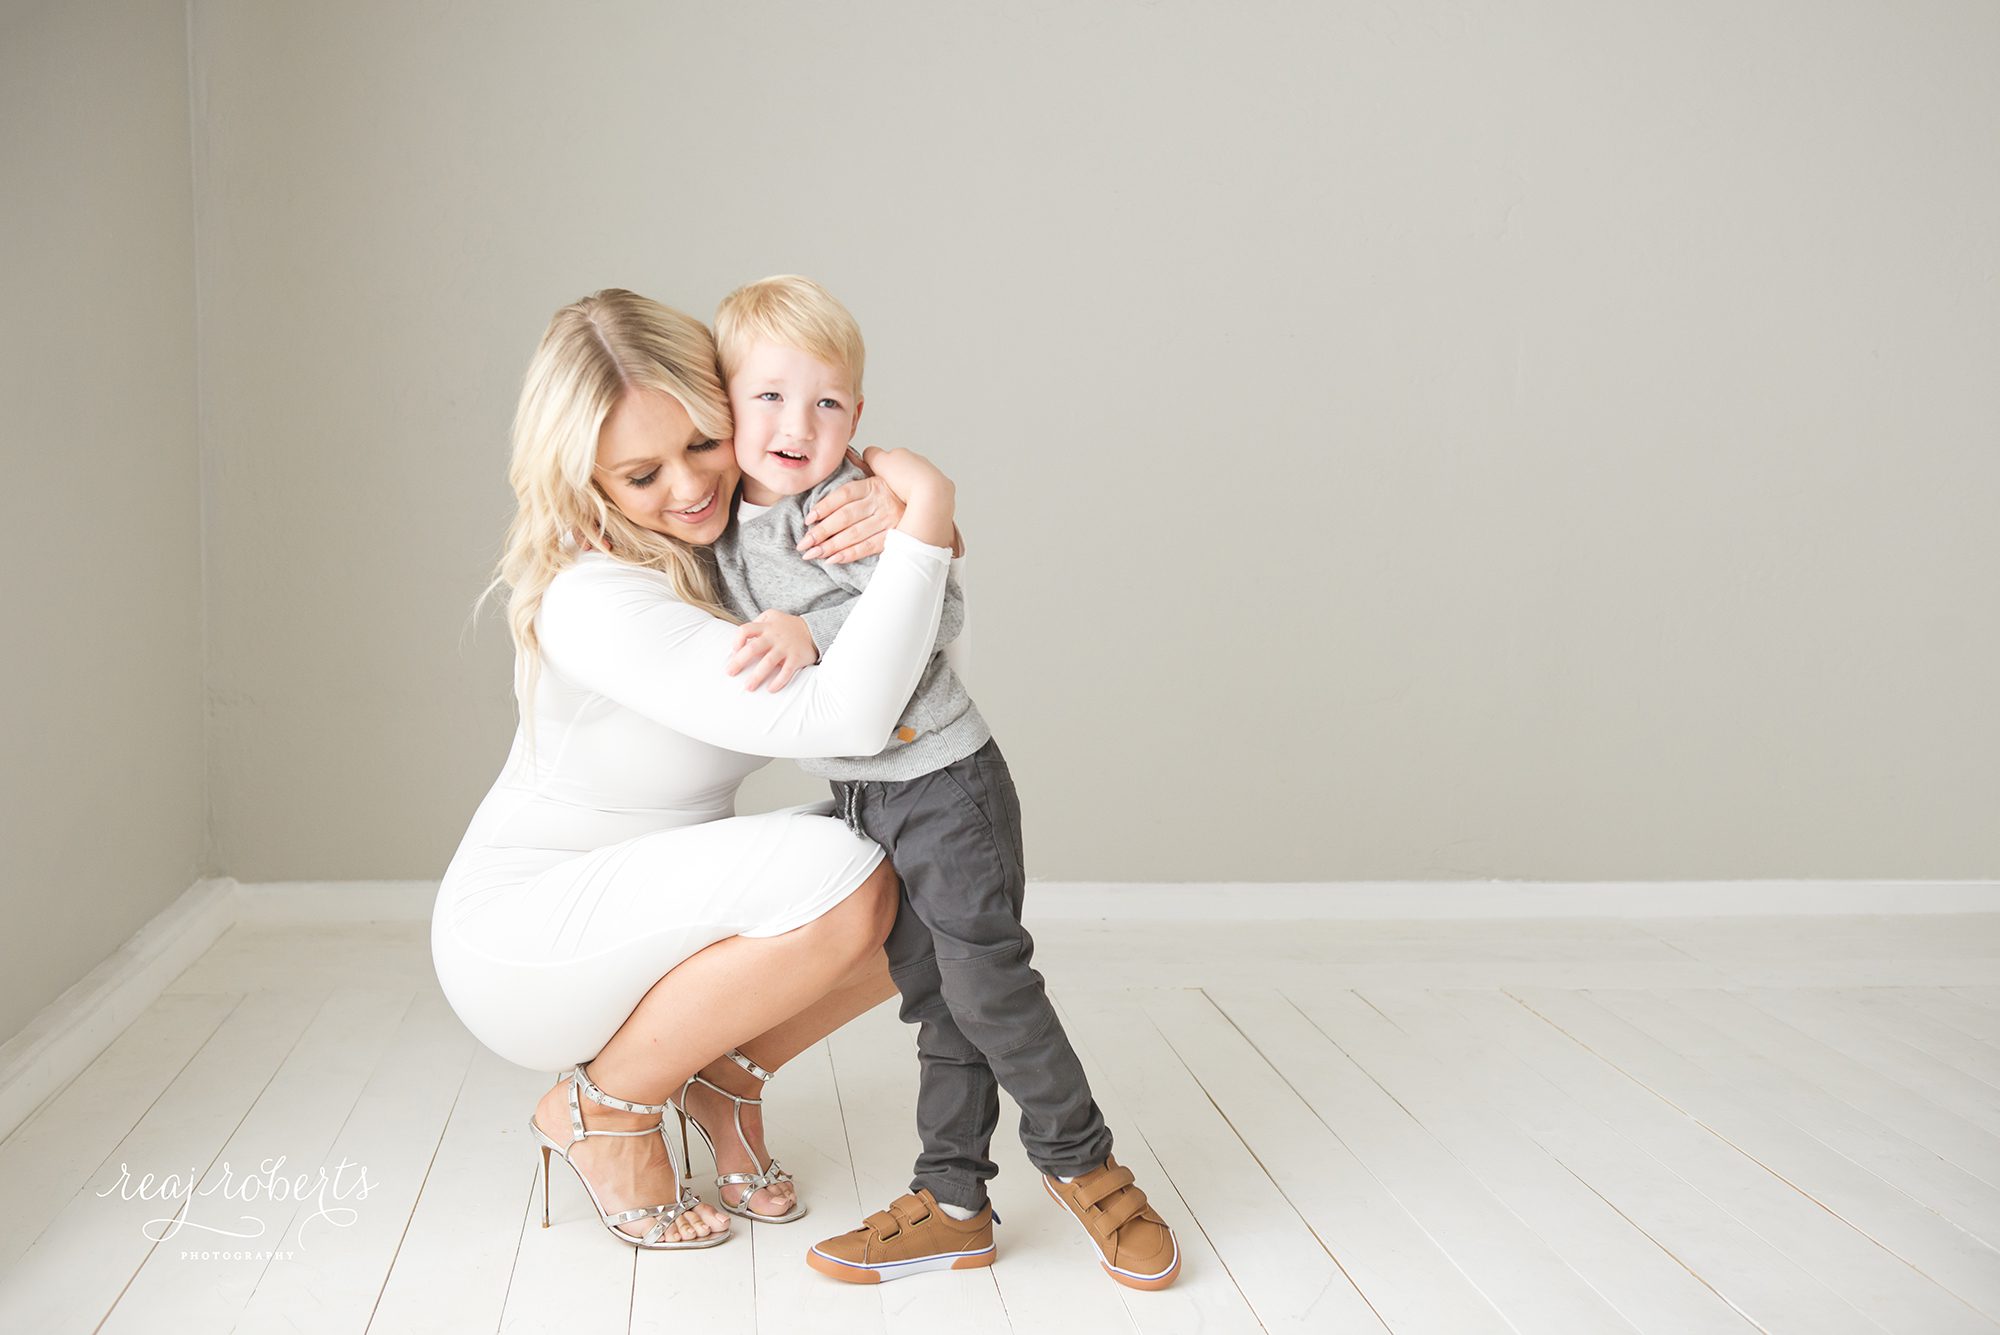 Mommy & Me Photos | Reaj Roberts Photography